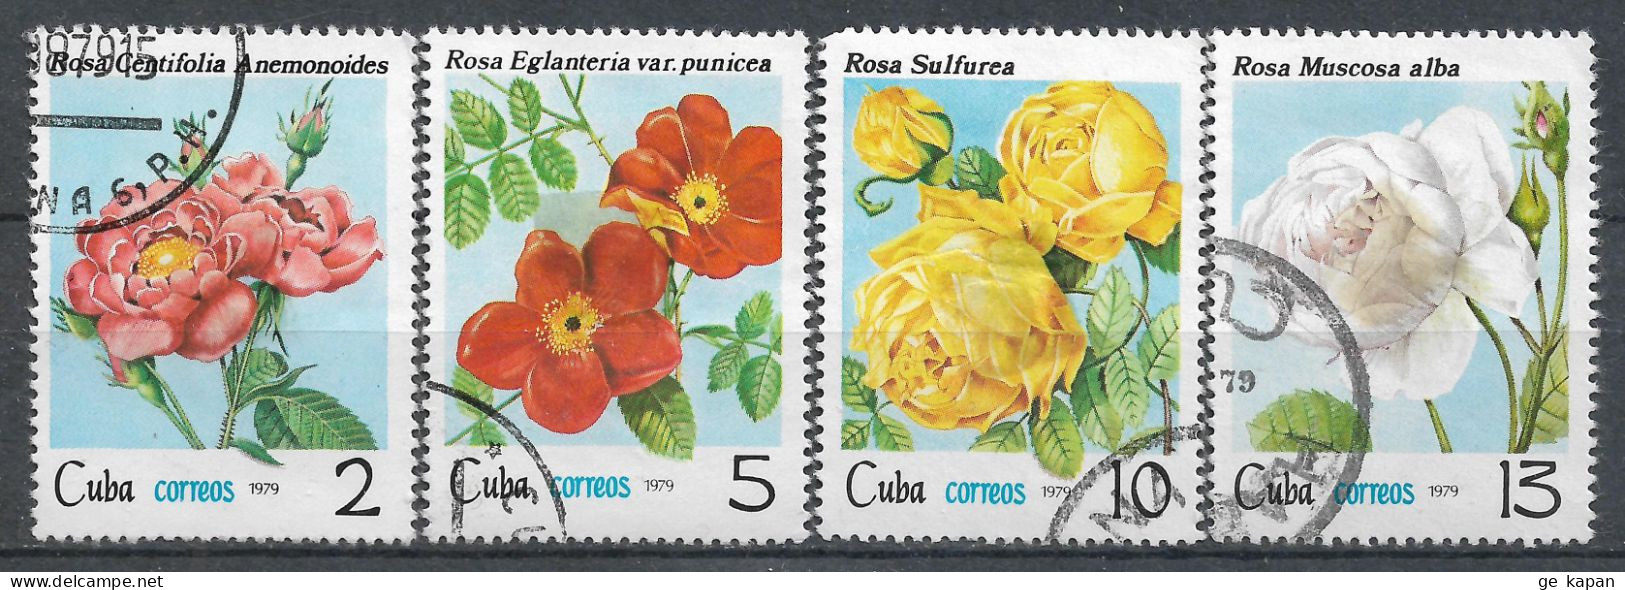 1979 CUBA Set Of 4 Used Stamps (Michel # 2420,2422-2424) CV €1.20 - Used Stamps